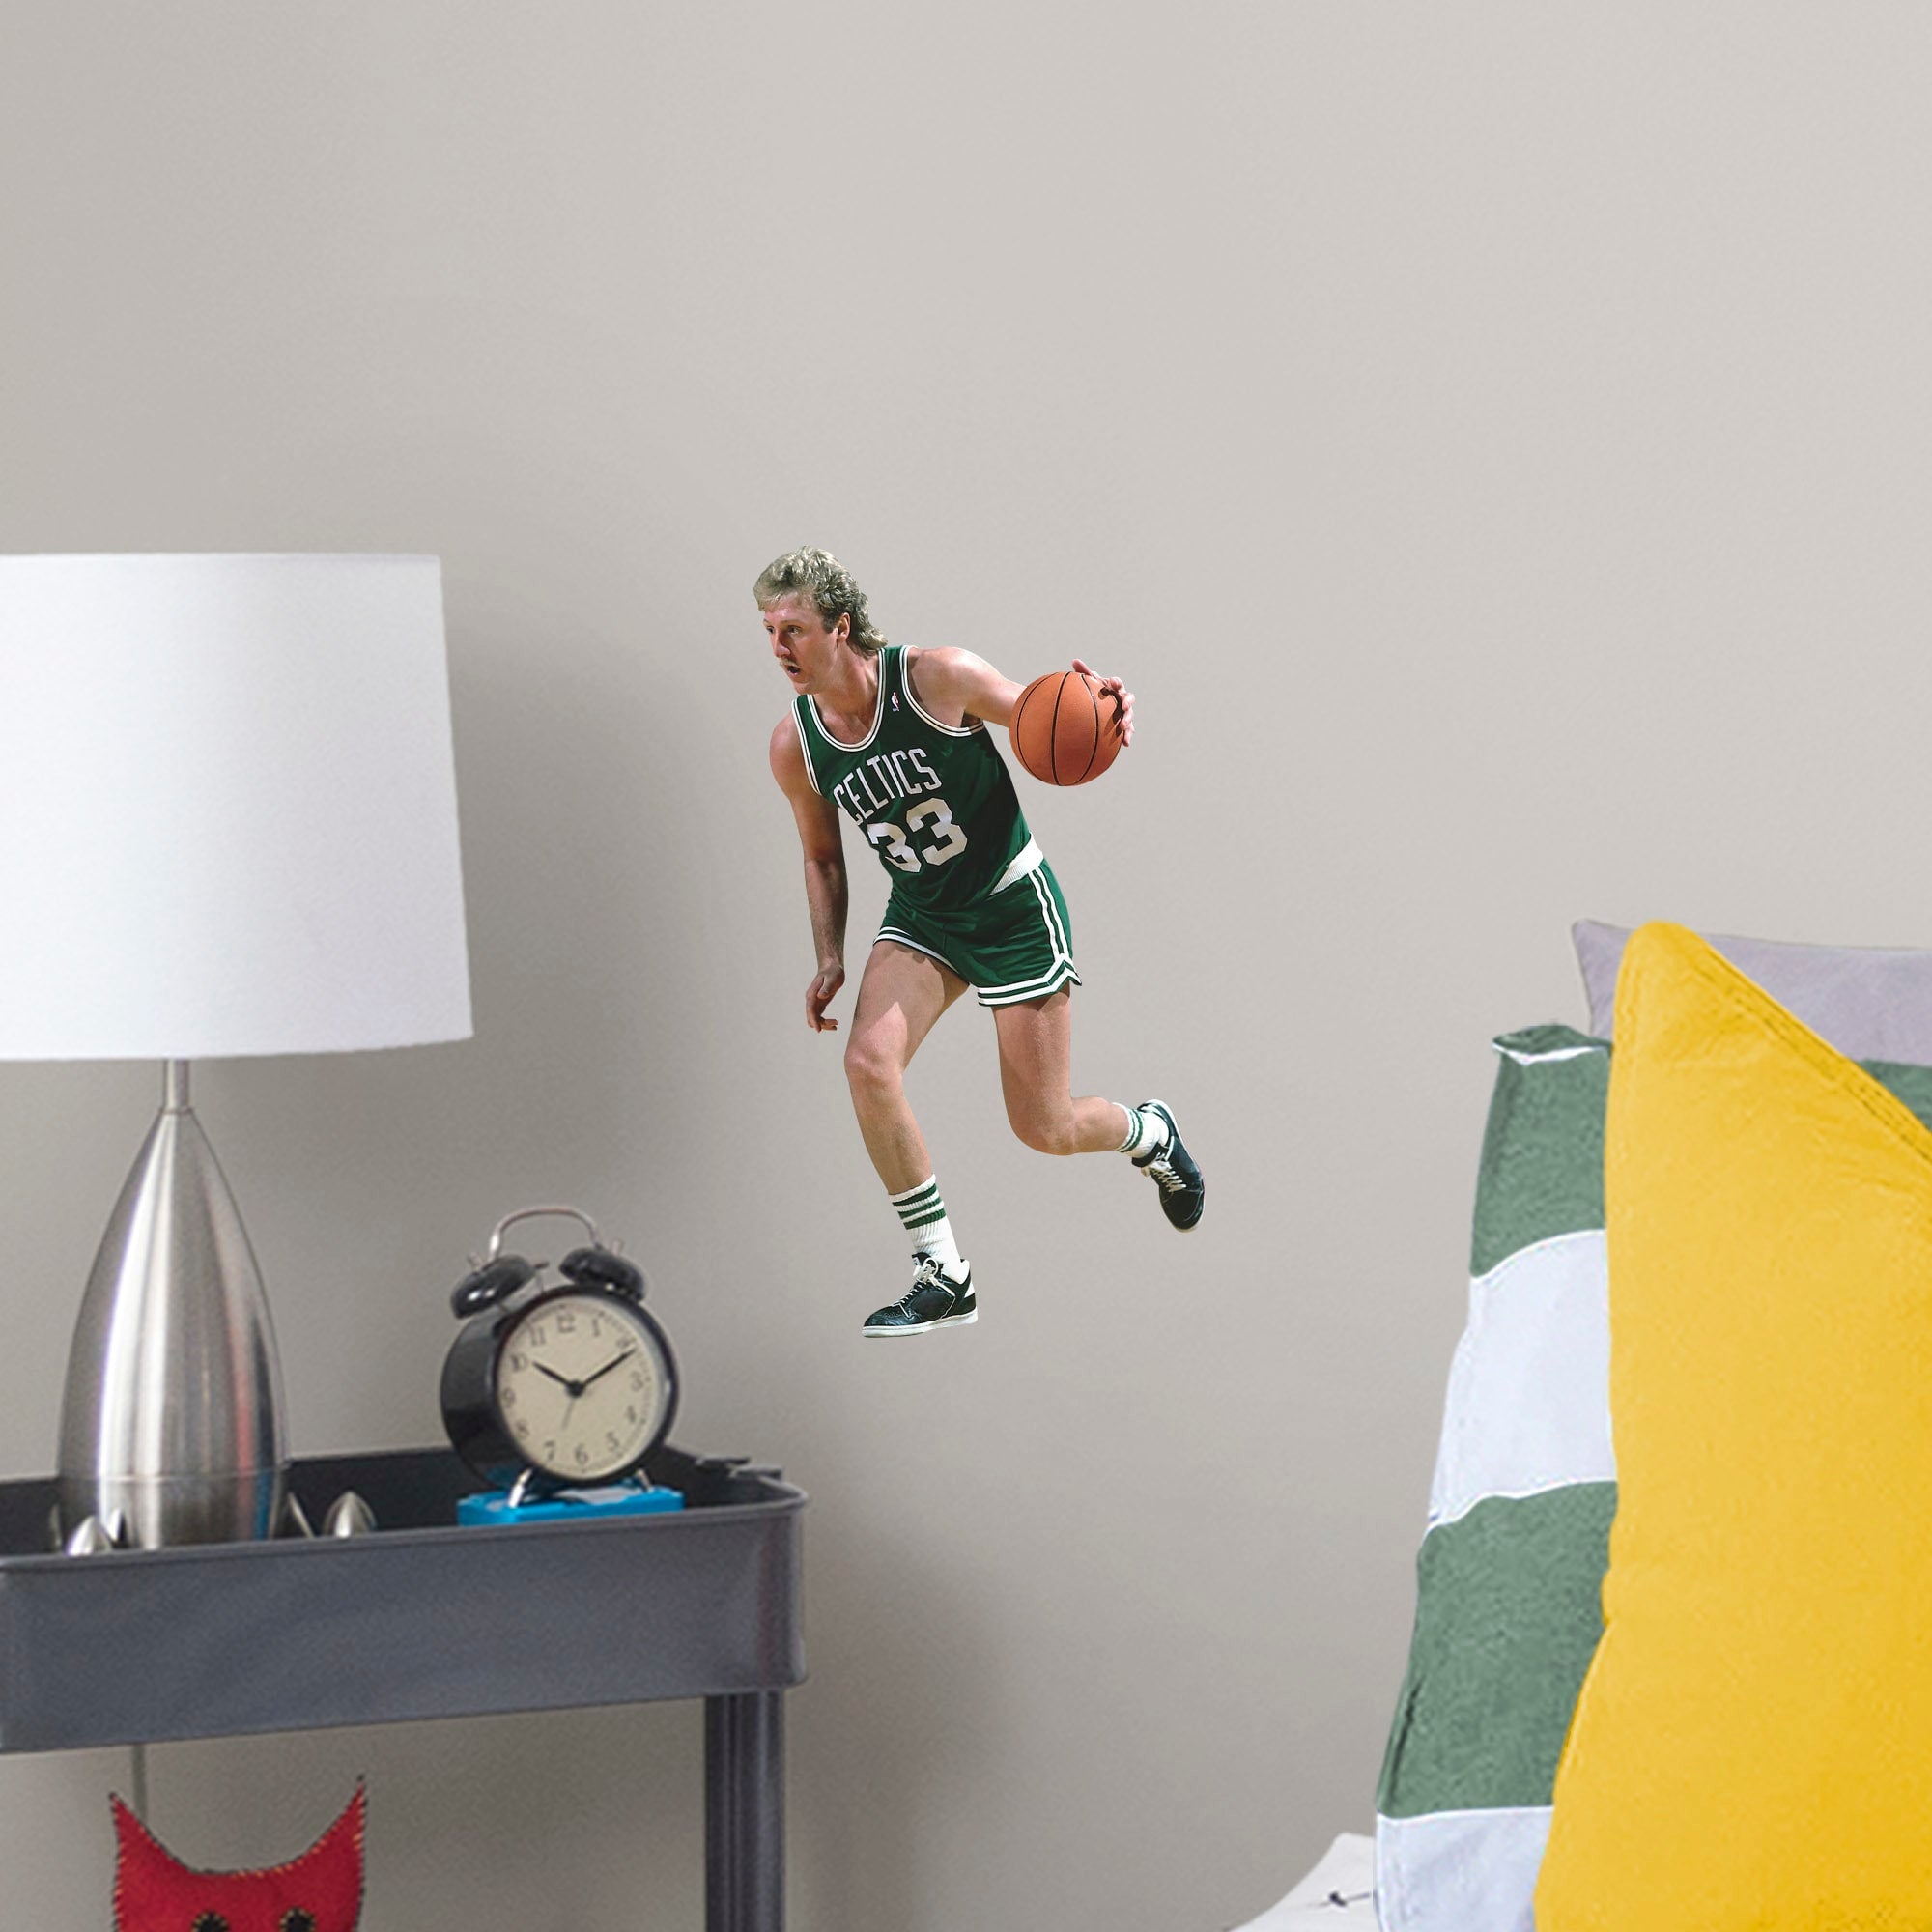 Larry Bird for Boston Celtics - Officially Licensed NBA Removable Wall Decal Large by Fathead | Vinyl